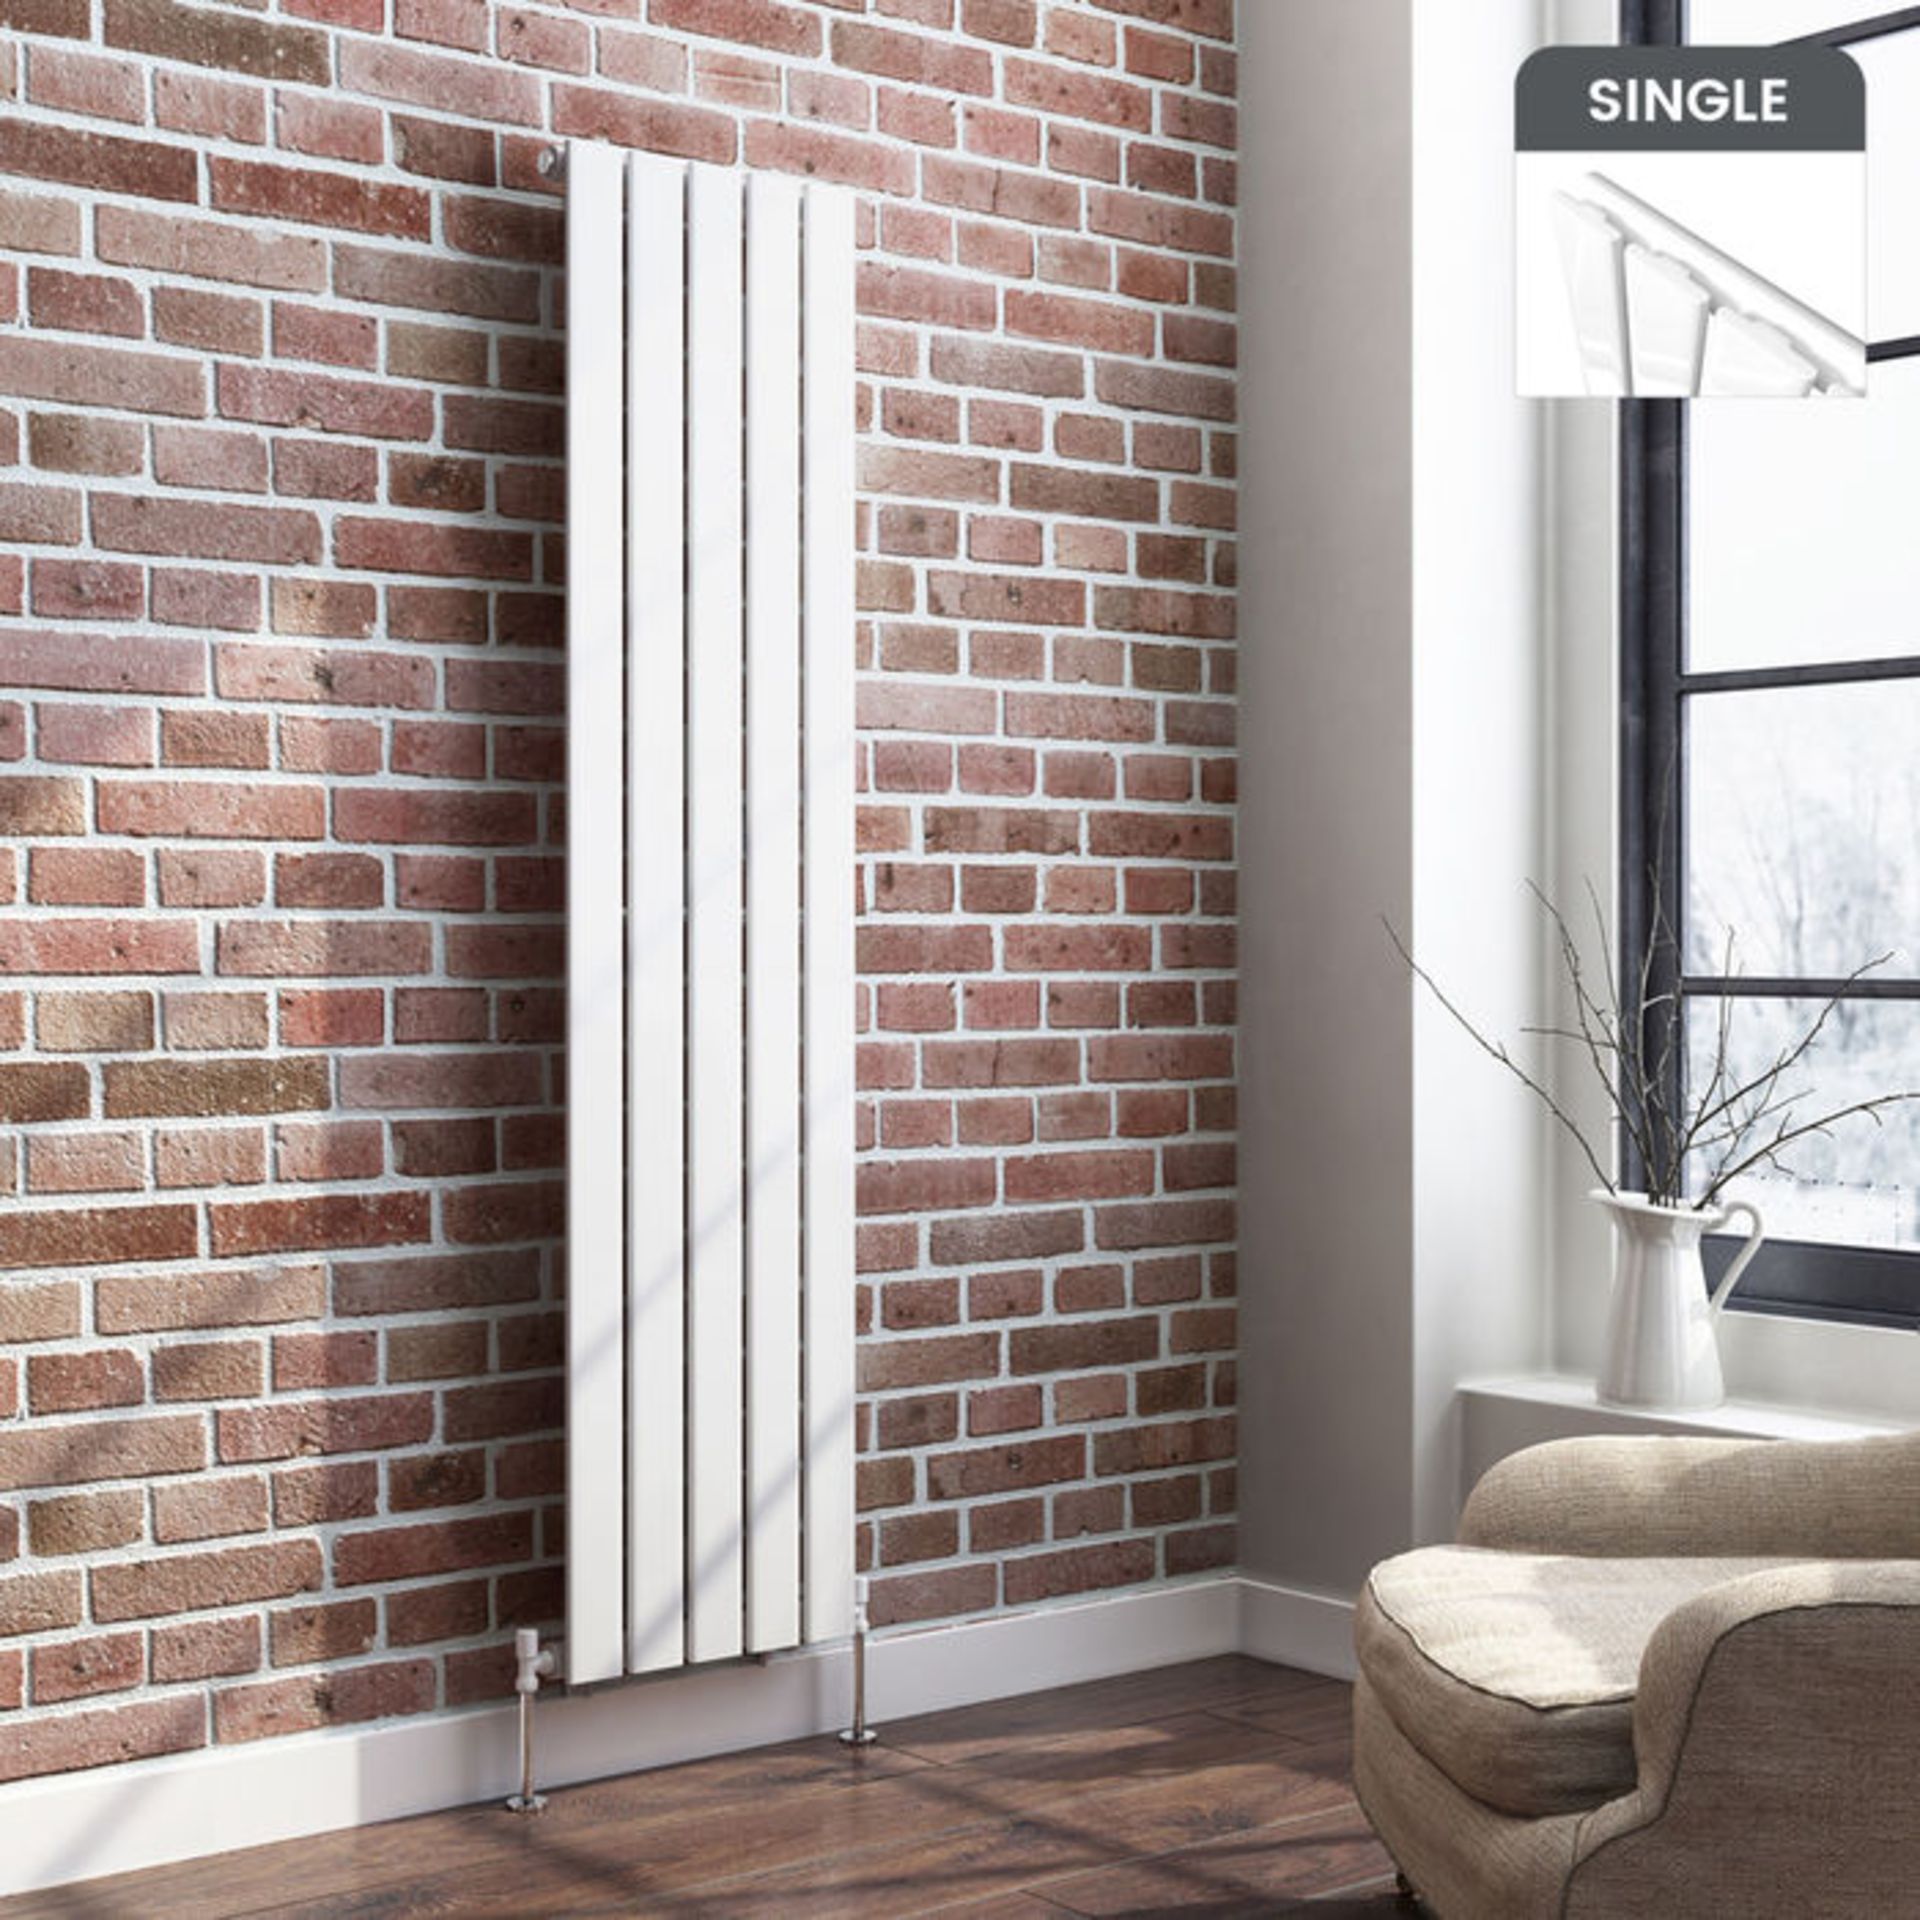 (ZA73) 1600x376mm Gloss White Single Flat Panel Vertical Radiator. RRP £275.99. Made from low carbon